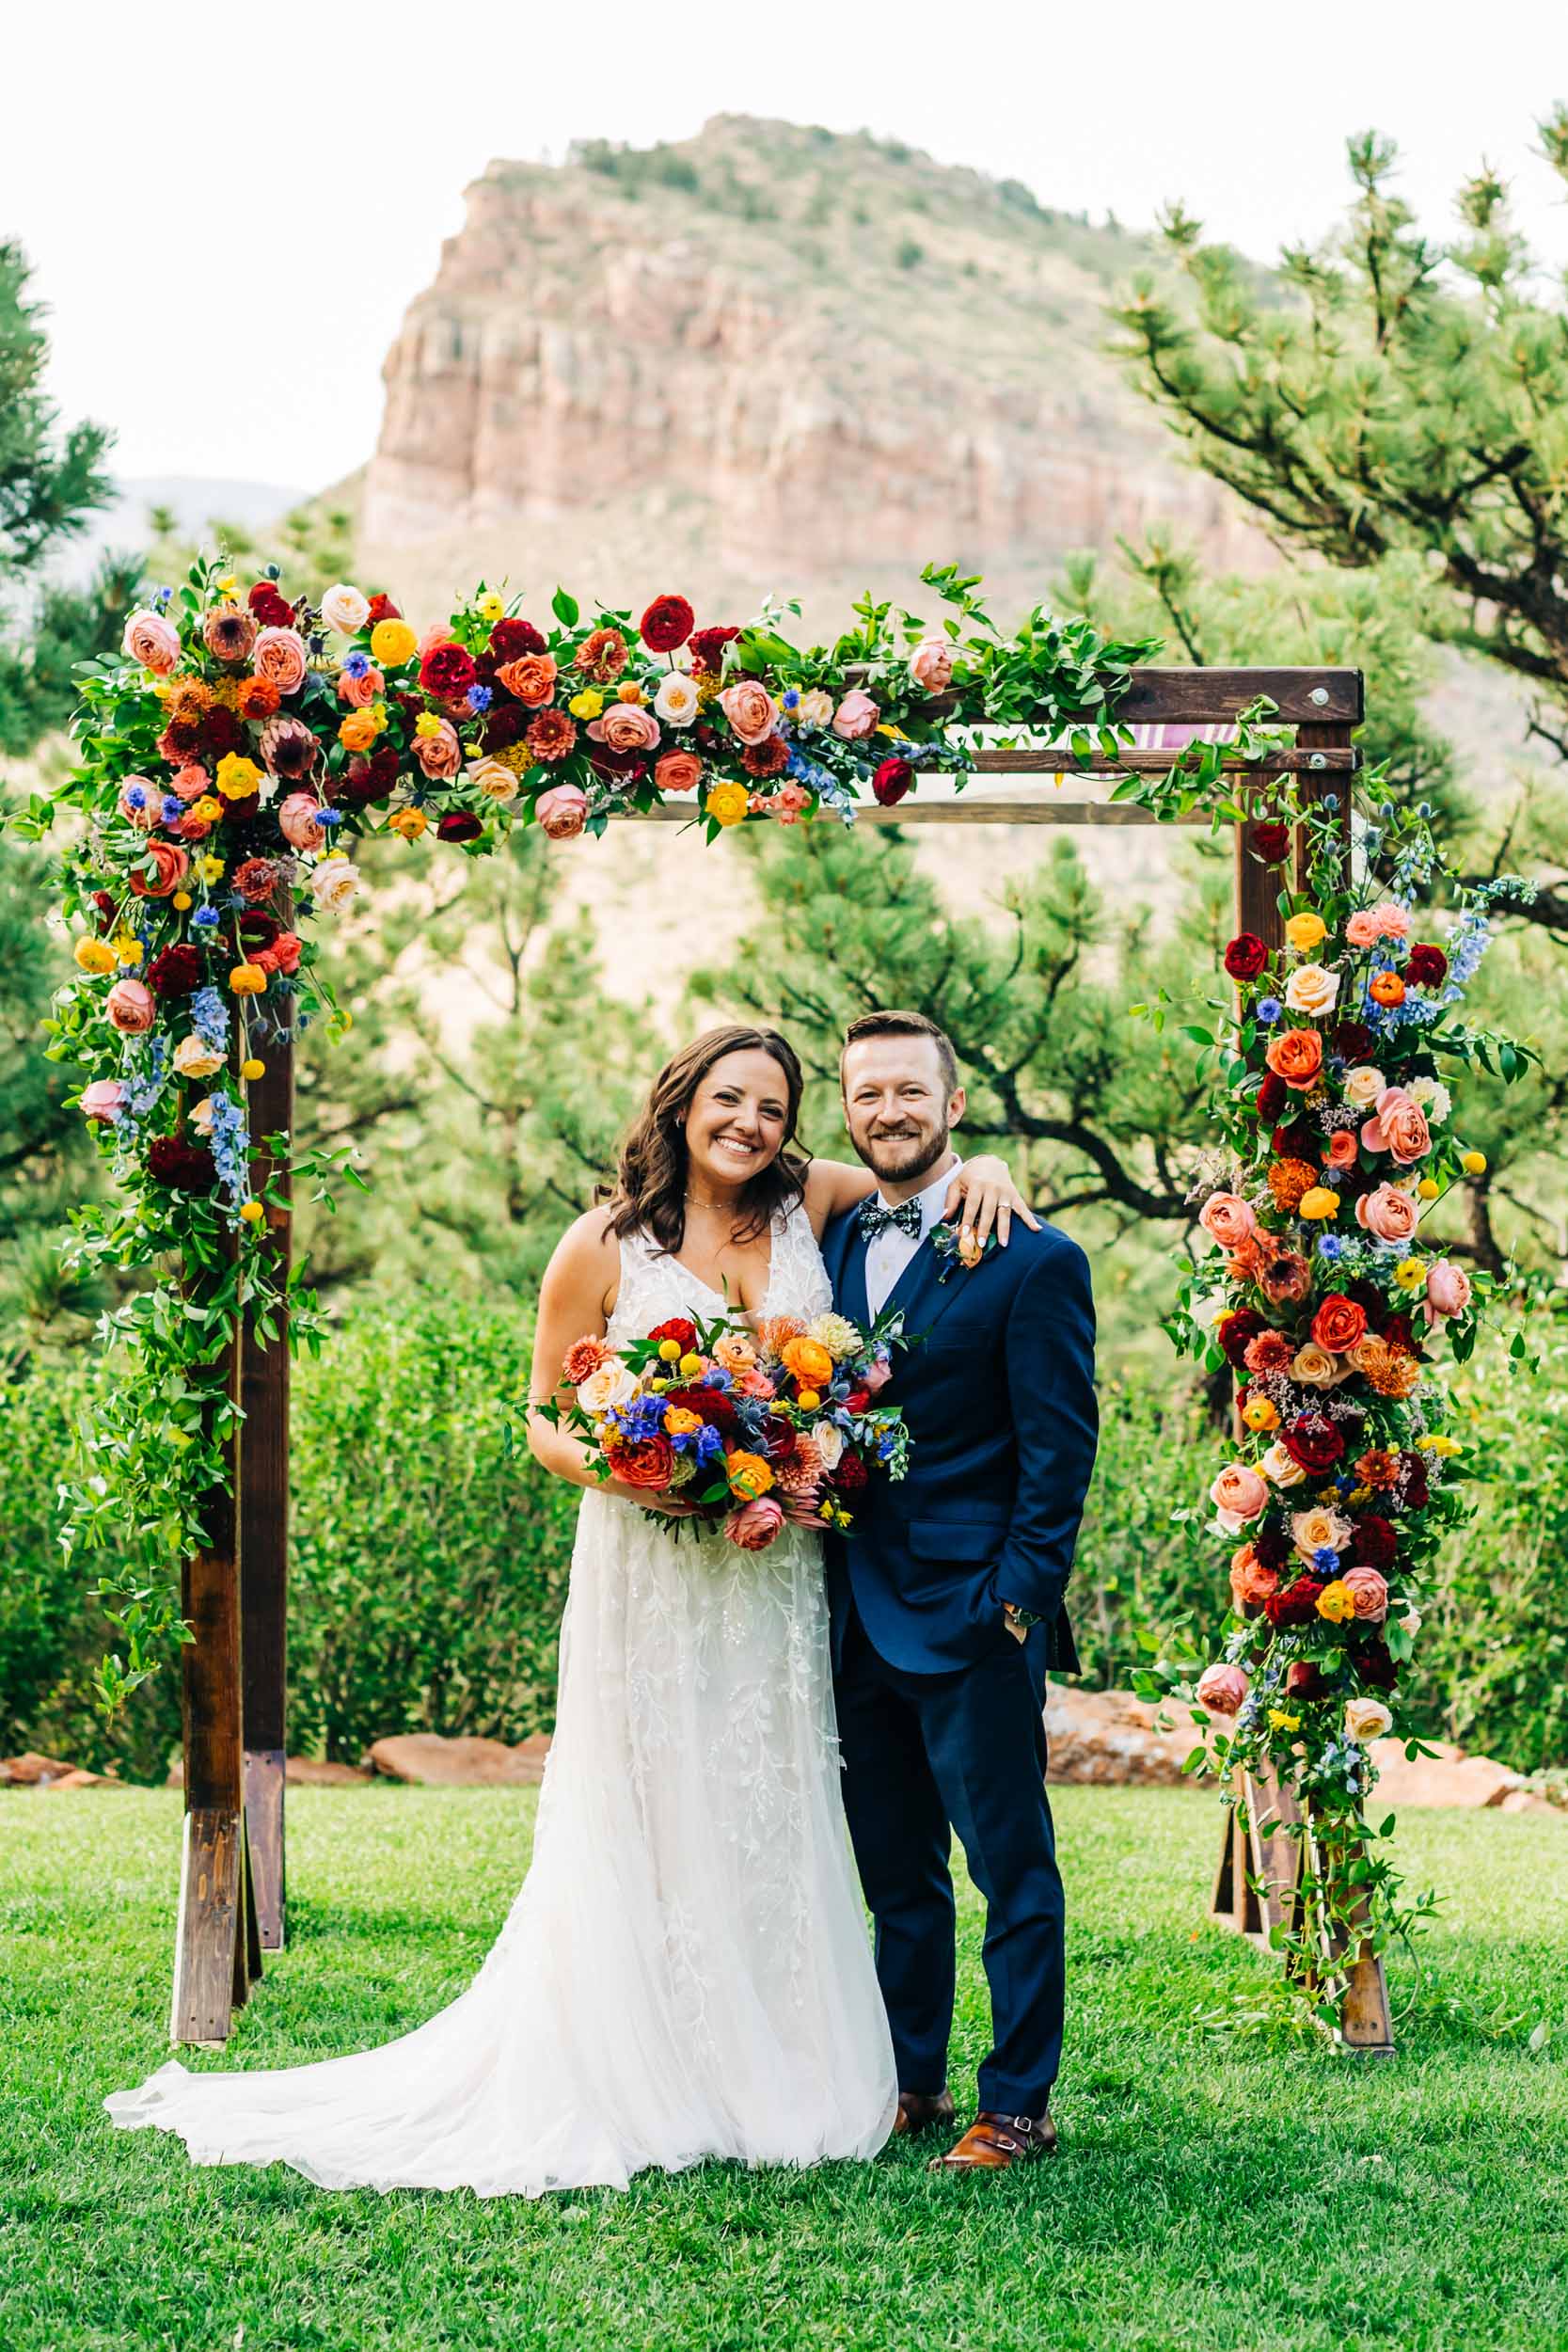 Colorful wedding at Lionscrest Manor in Colorado by Shea McGrath Photography